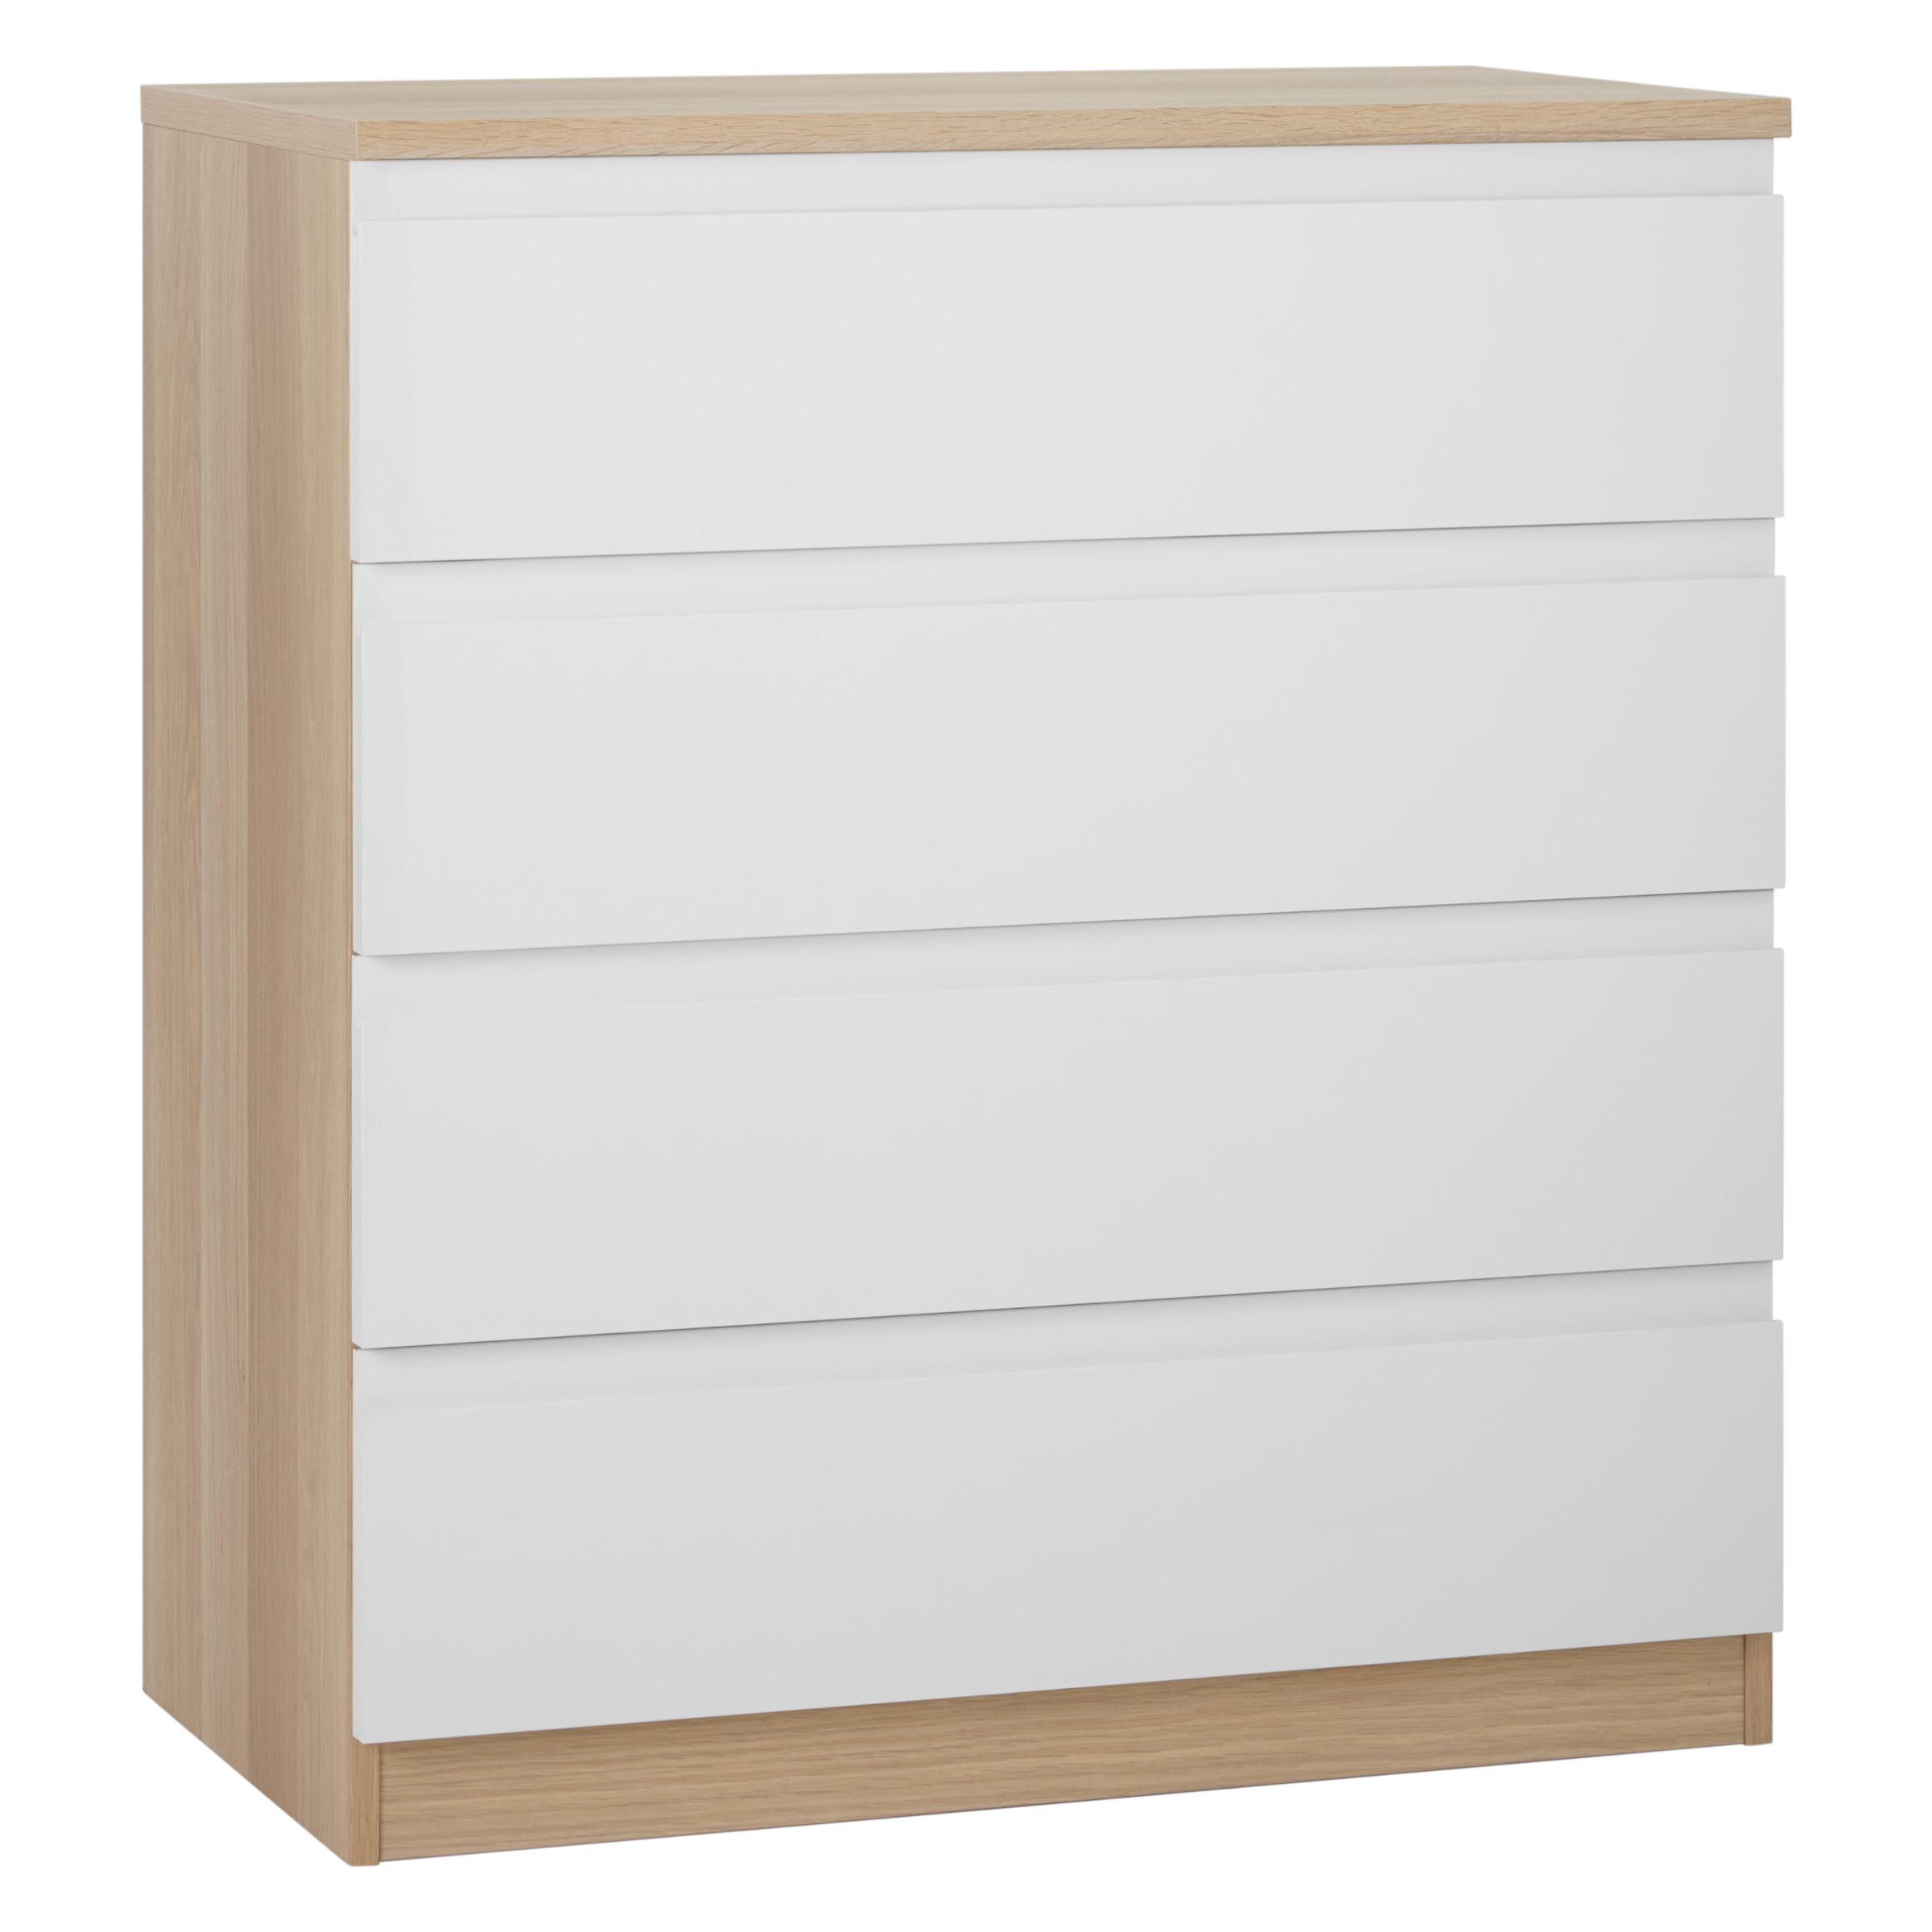 House By John Lewis Mix It Wide 4 Drawer Chest Gloss White Natural Oak